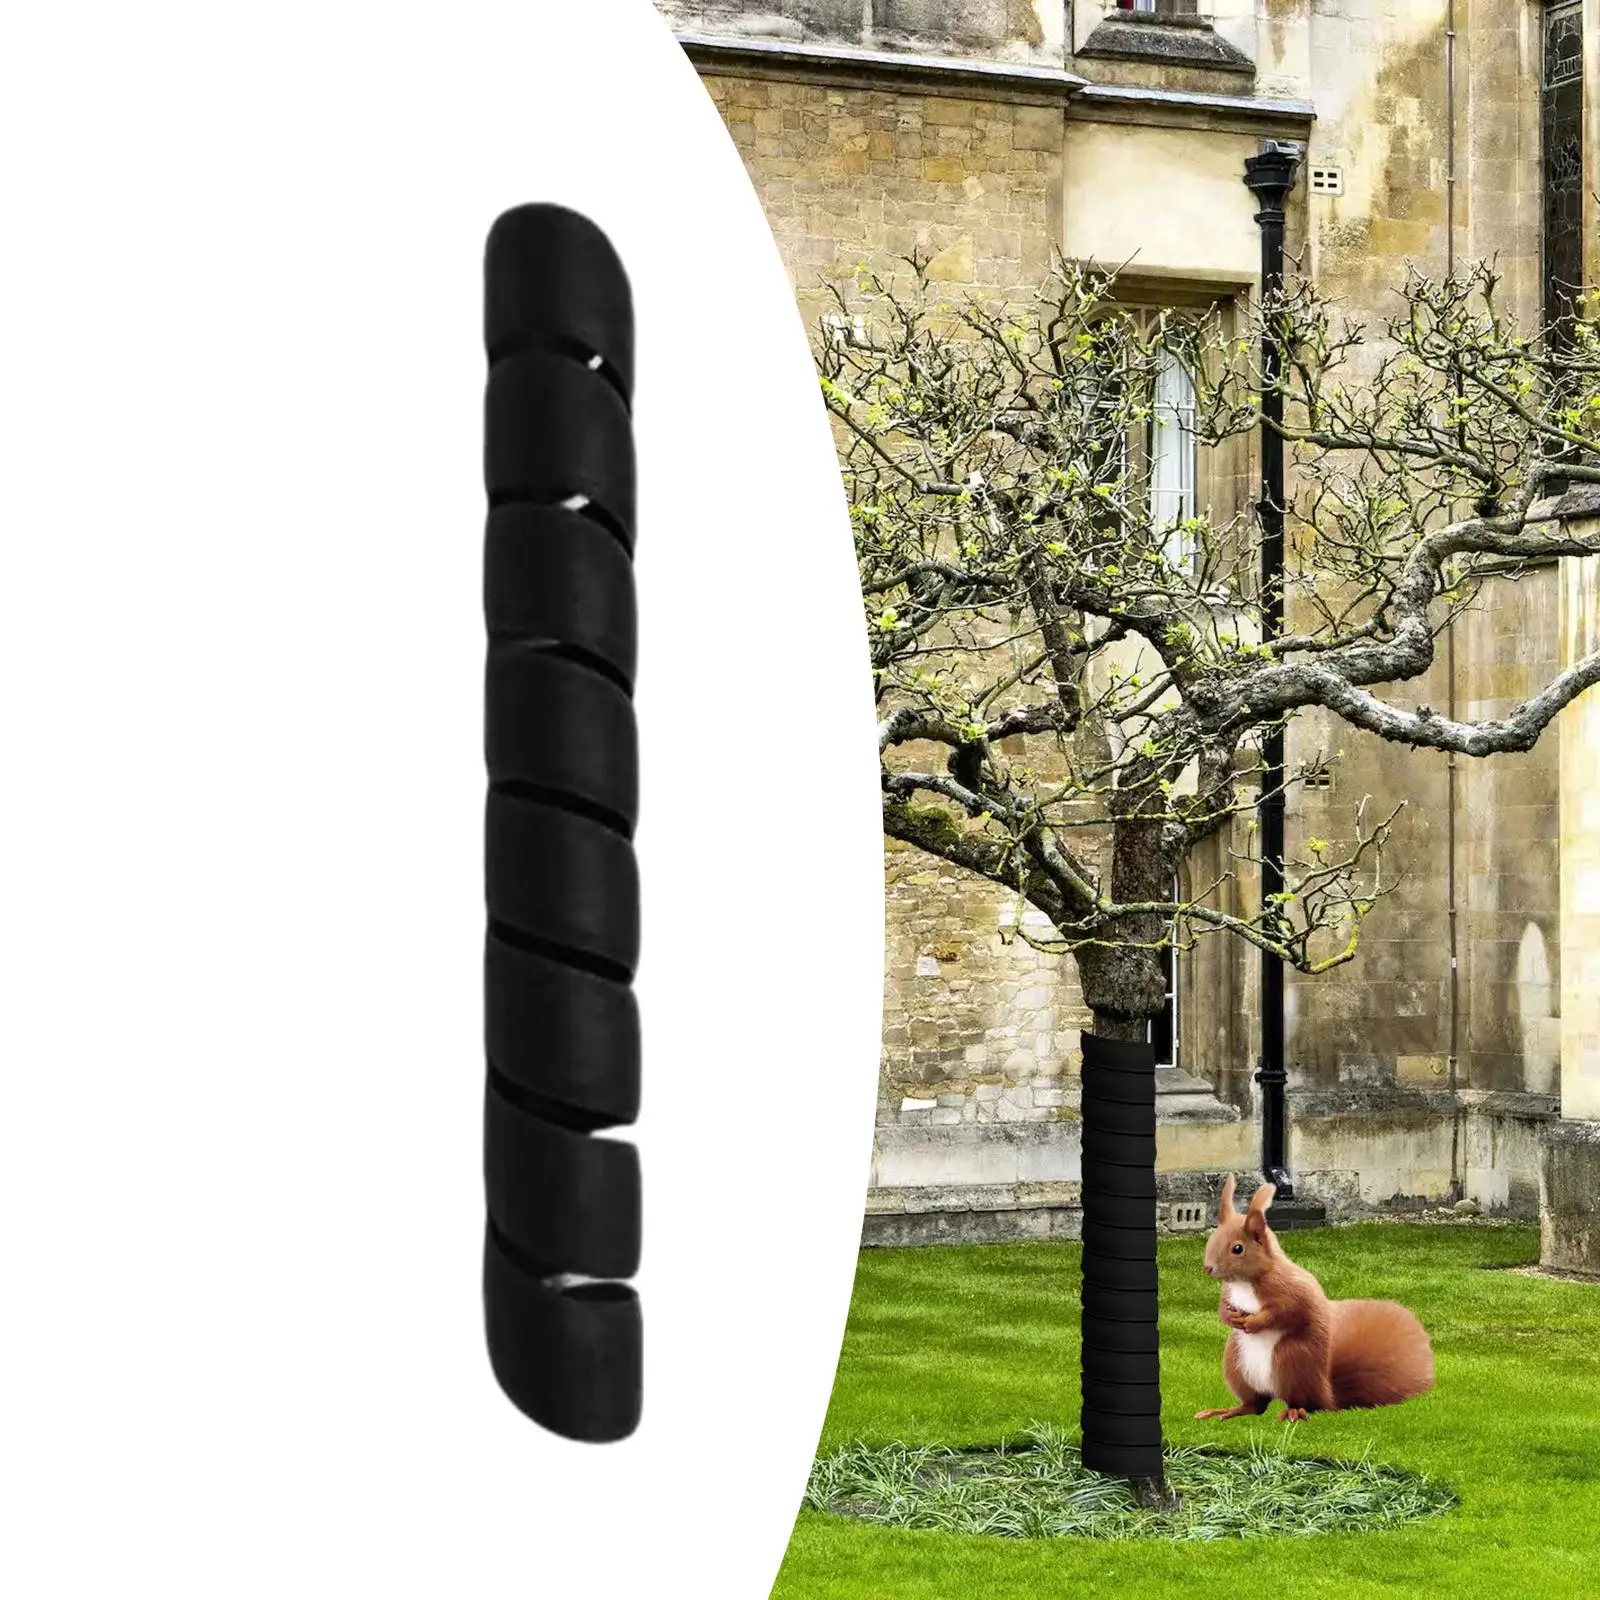 2 Pieces Black Tree Trunk Protectors Spiral Tree Guards, Protective Plants Guard, Tree Protector Tube Wraps